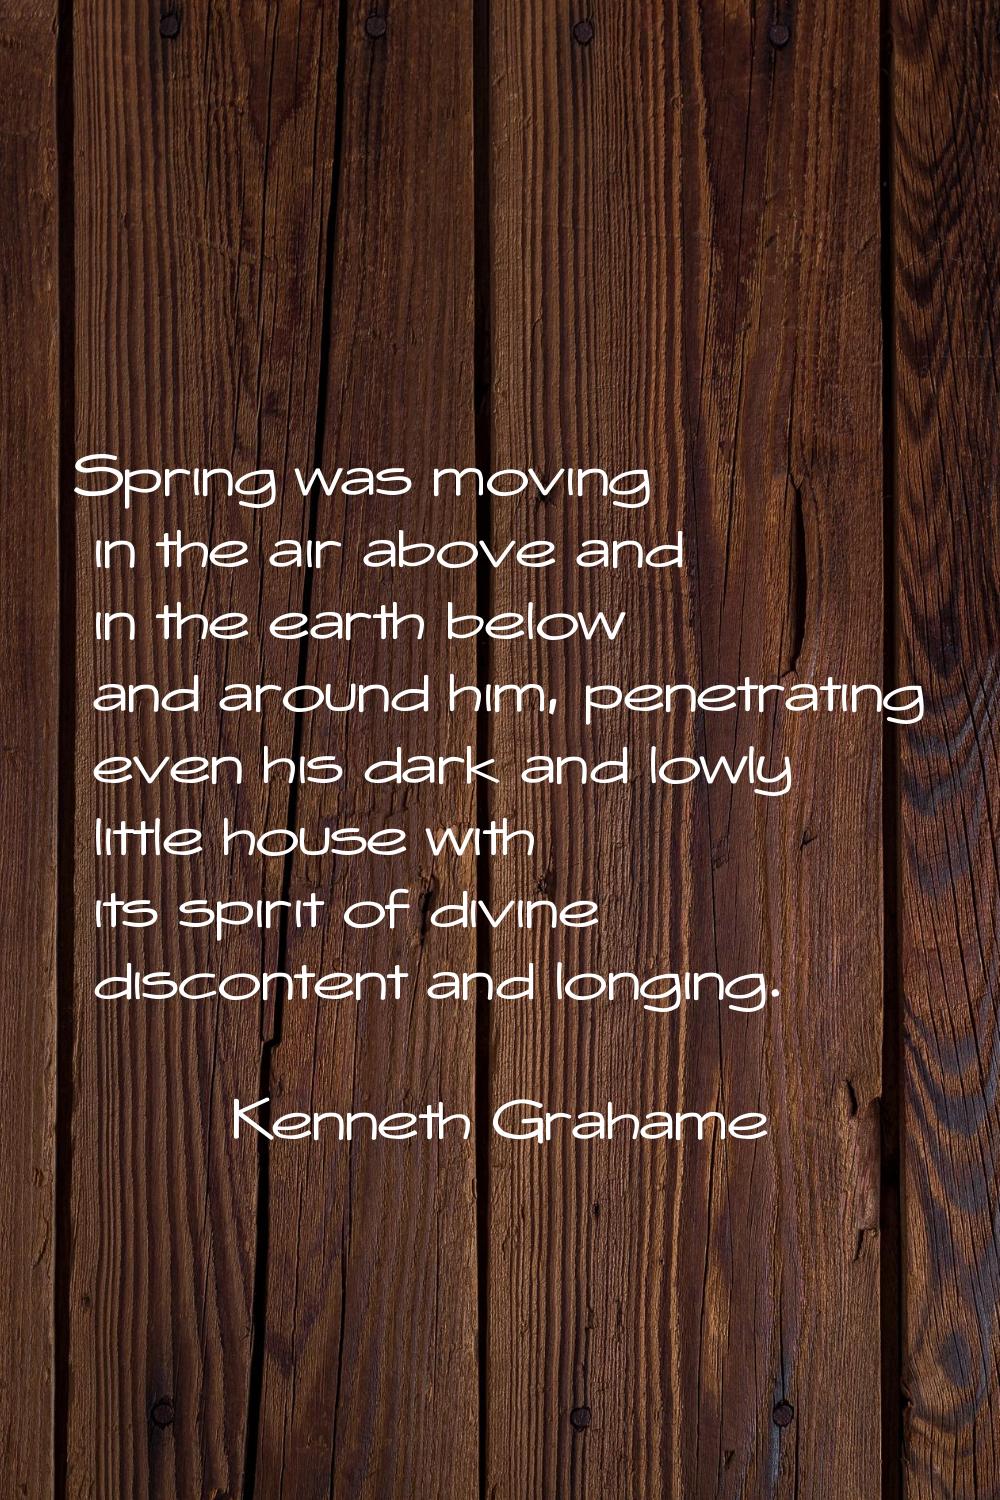 Spring was moving in the air above and in the earth below and around him, penetrating even his dark